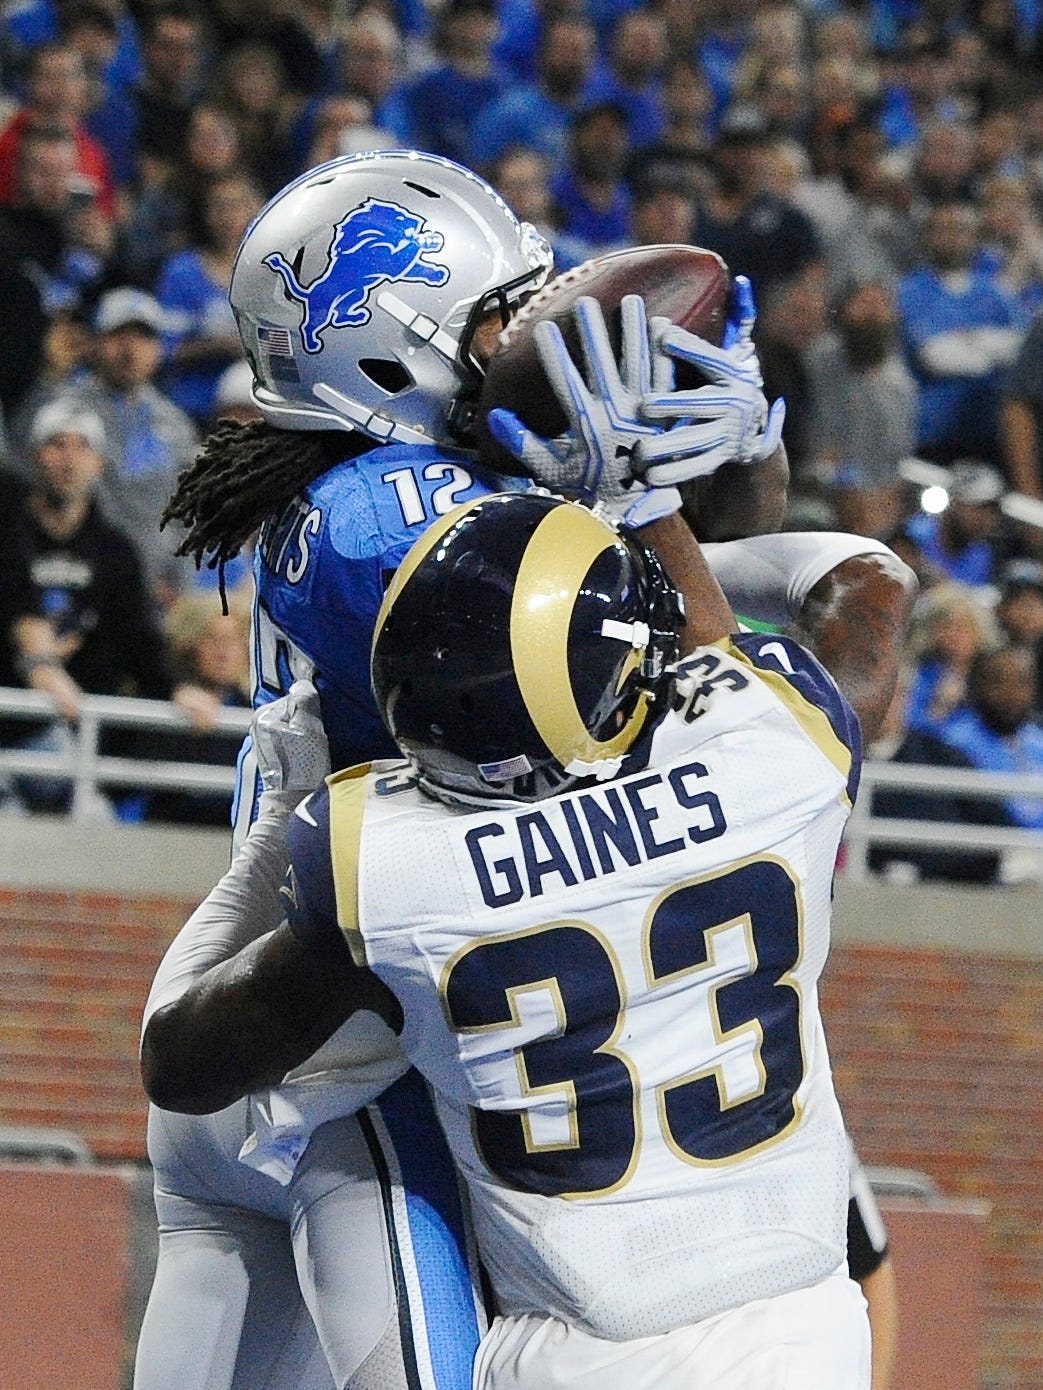 A closer looks shows why Rams E.J. Gaines picked up a penalty on the play, which wide receiver Andre Roberts and Detroit turned down for the score.